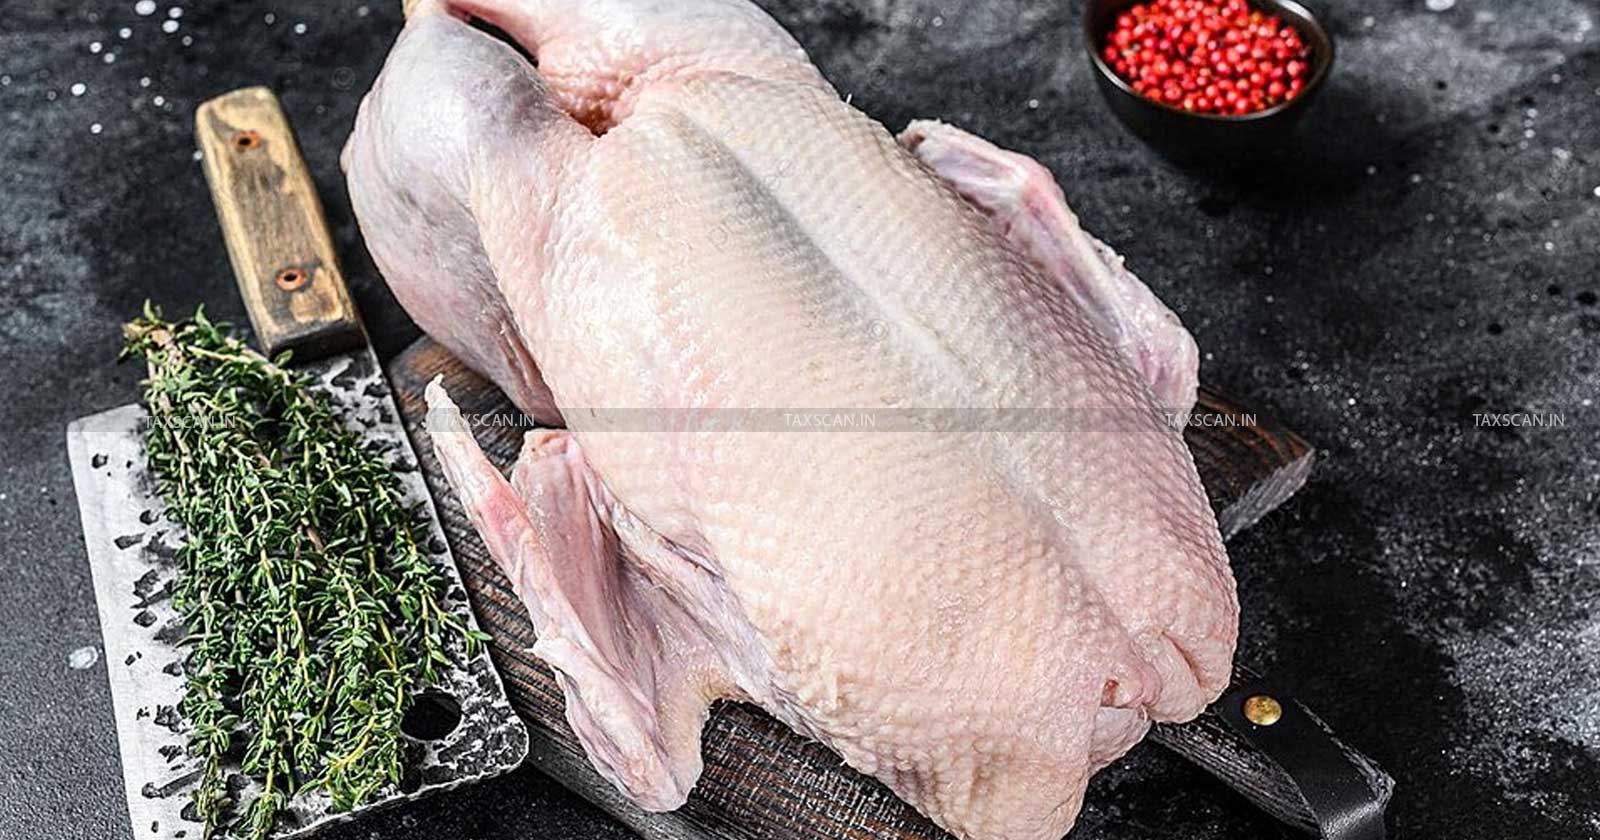 DGFT - Import Policy - Import Duty - Premium Duck Meat - Directorate General of Foreign Trade - taxscan